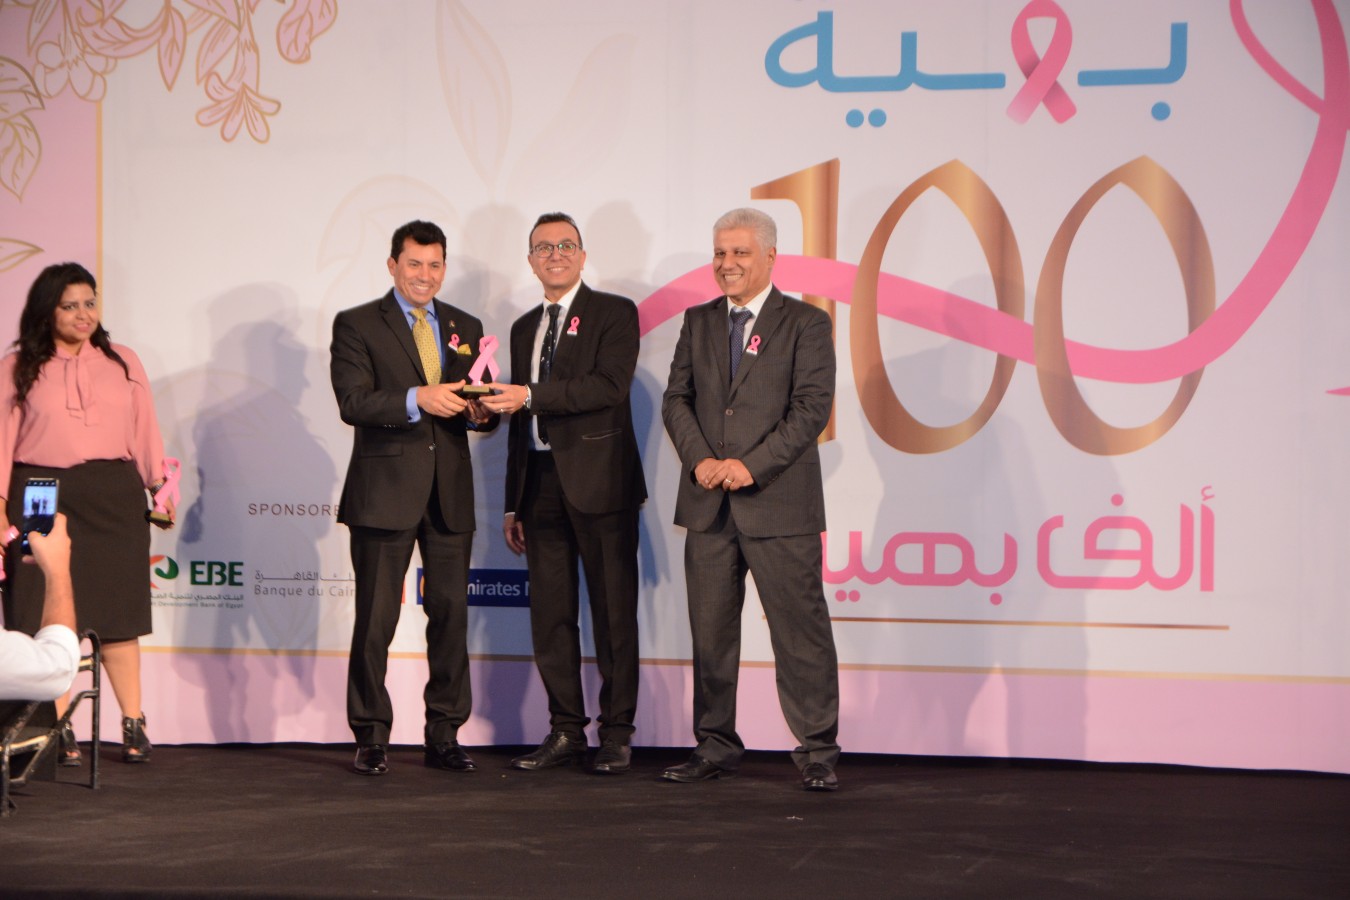 Baheya’s foundation is a nongovernmental organization for unpaid cancer breast treatment, it was opened four years ago, aiming at receiving 10000 women per year